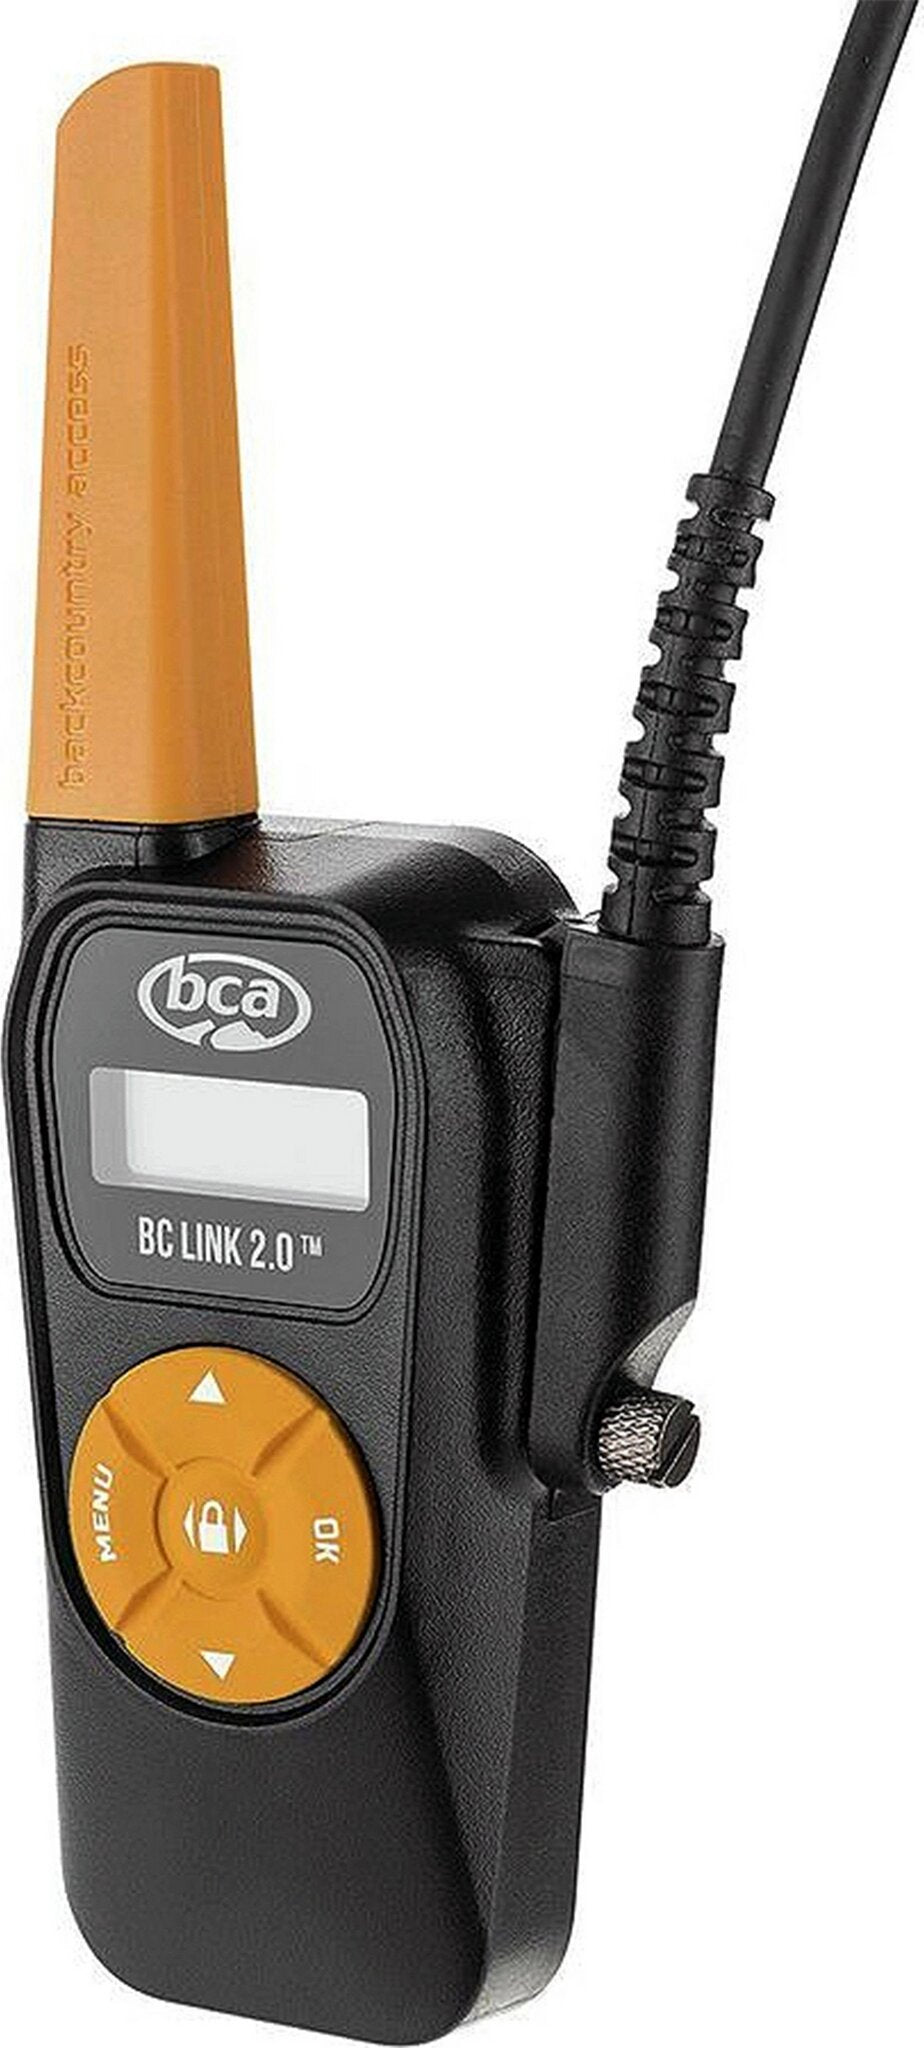 Backcountry Access BC Link 2.0 Radio Altitude Sports